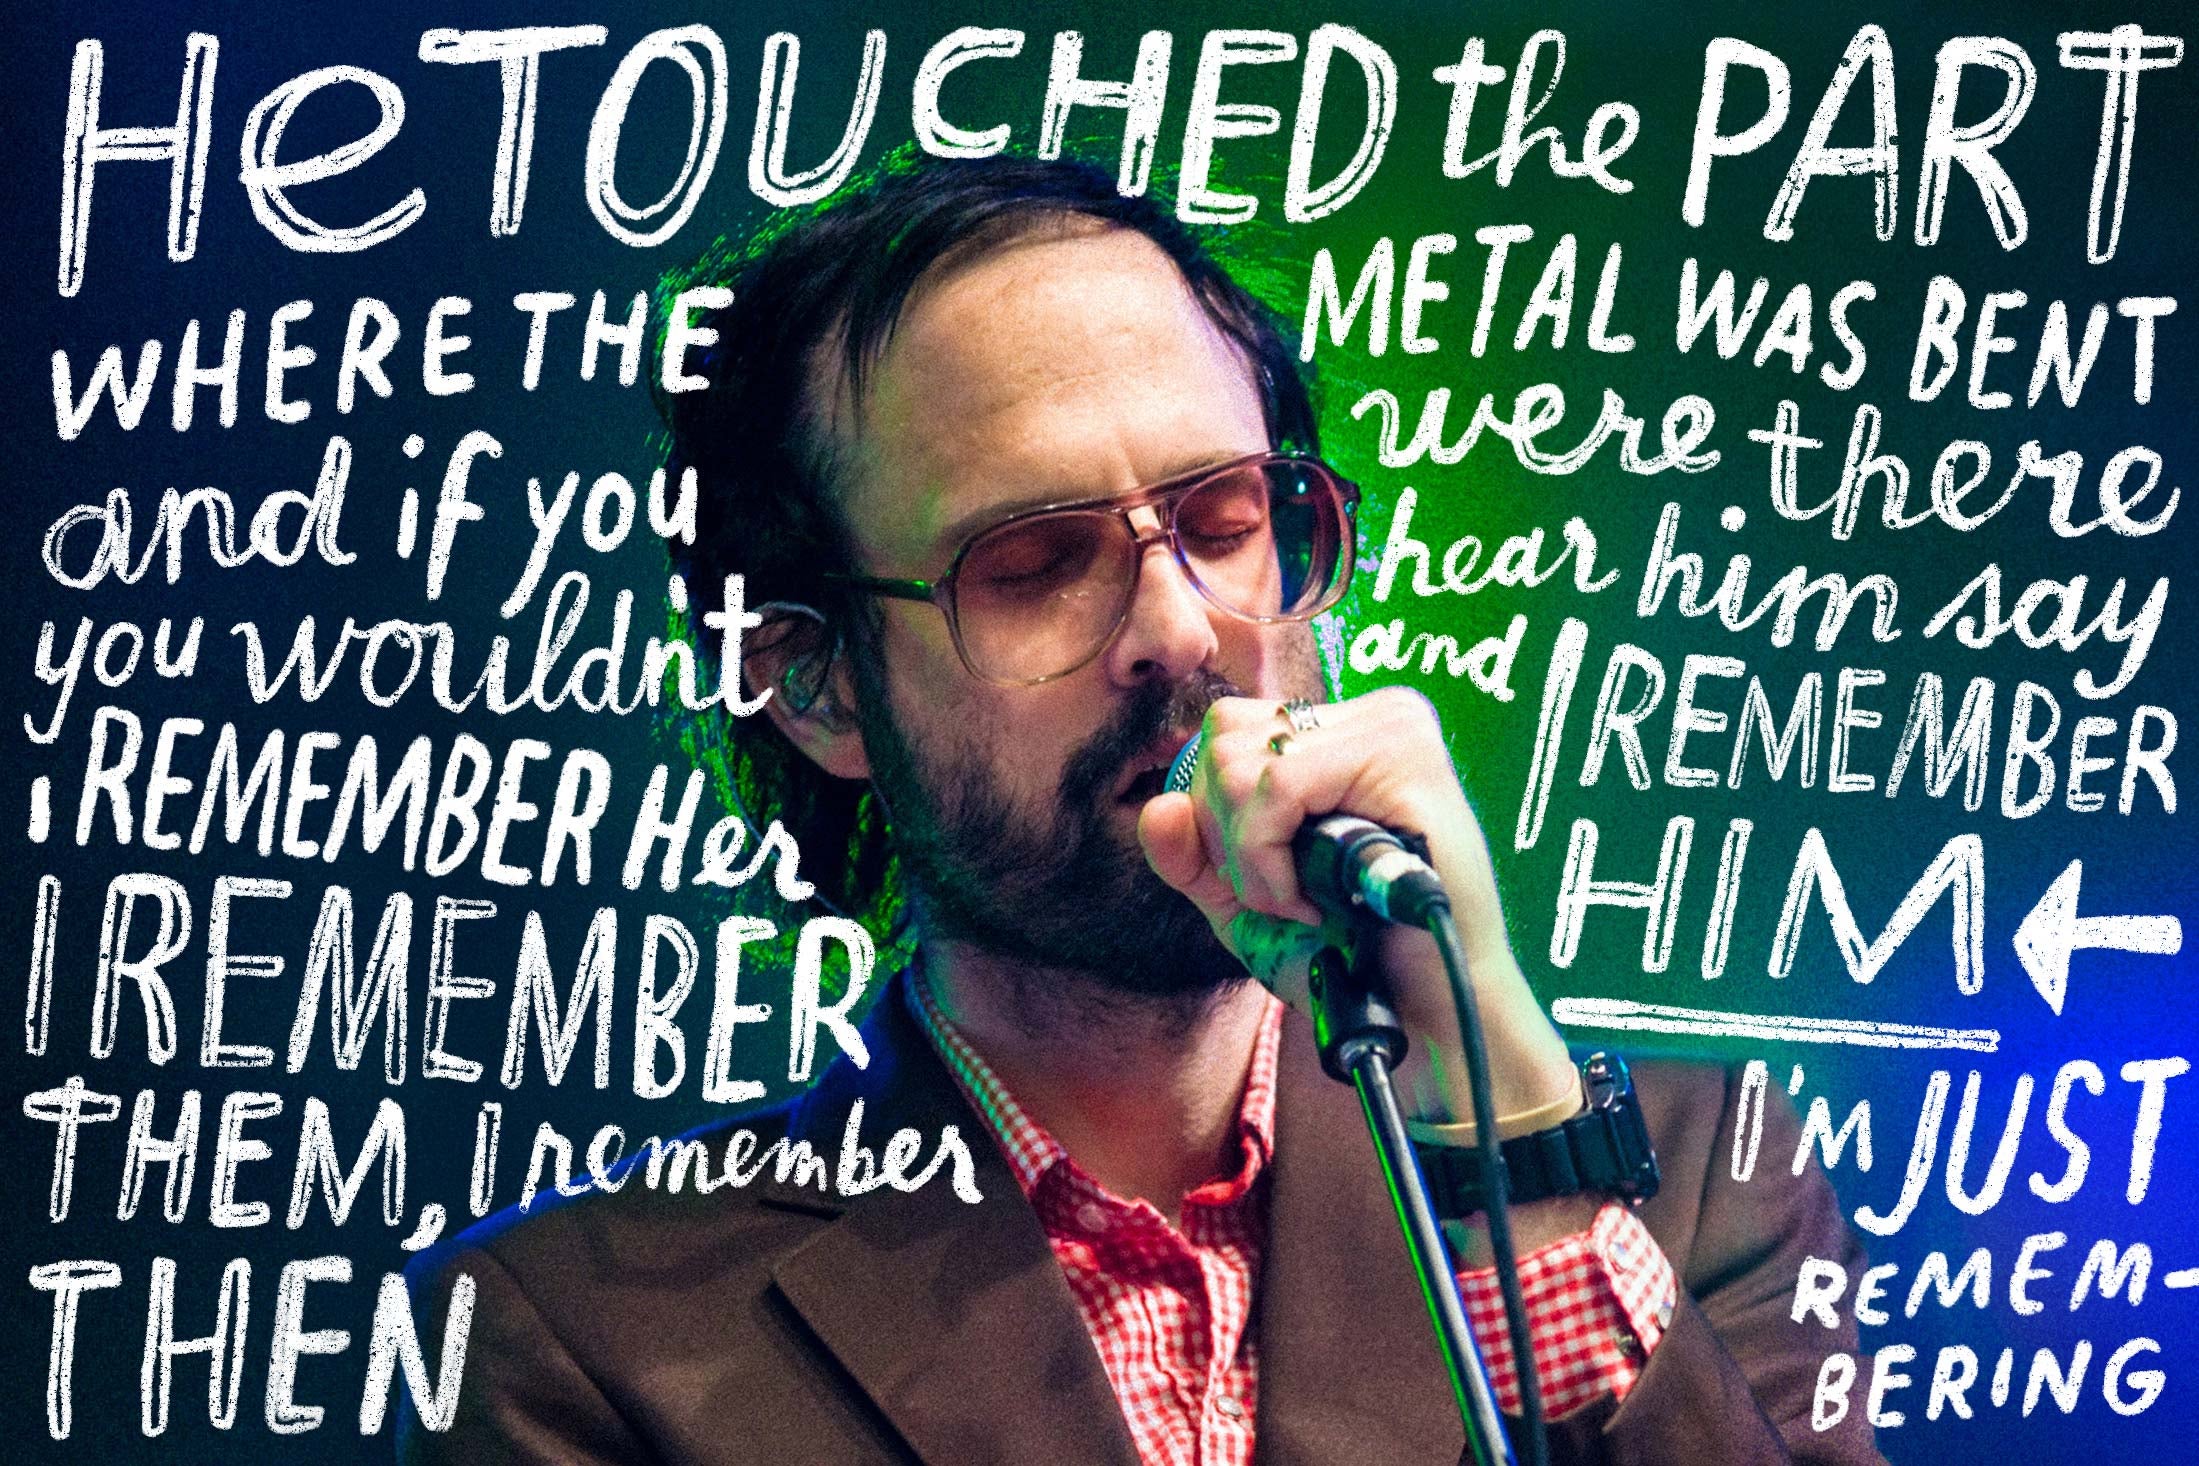 David Berman surrounded by some of his lyrics